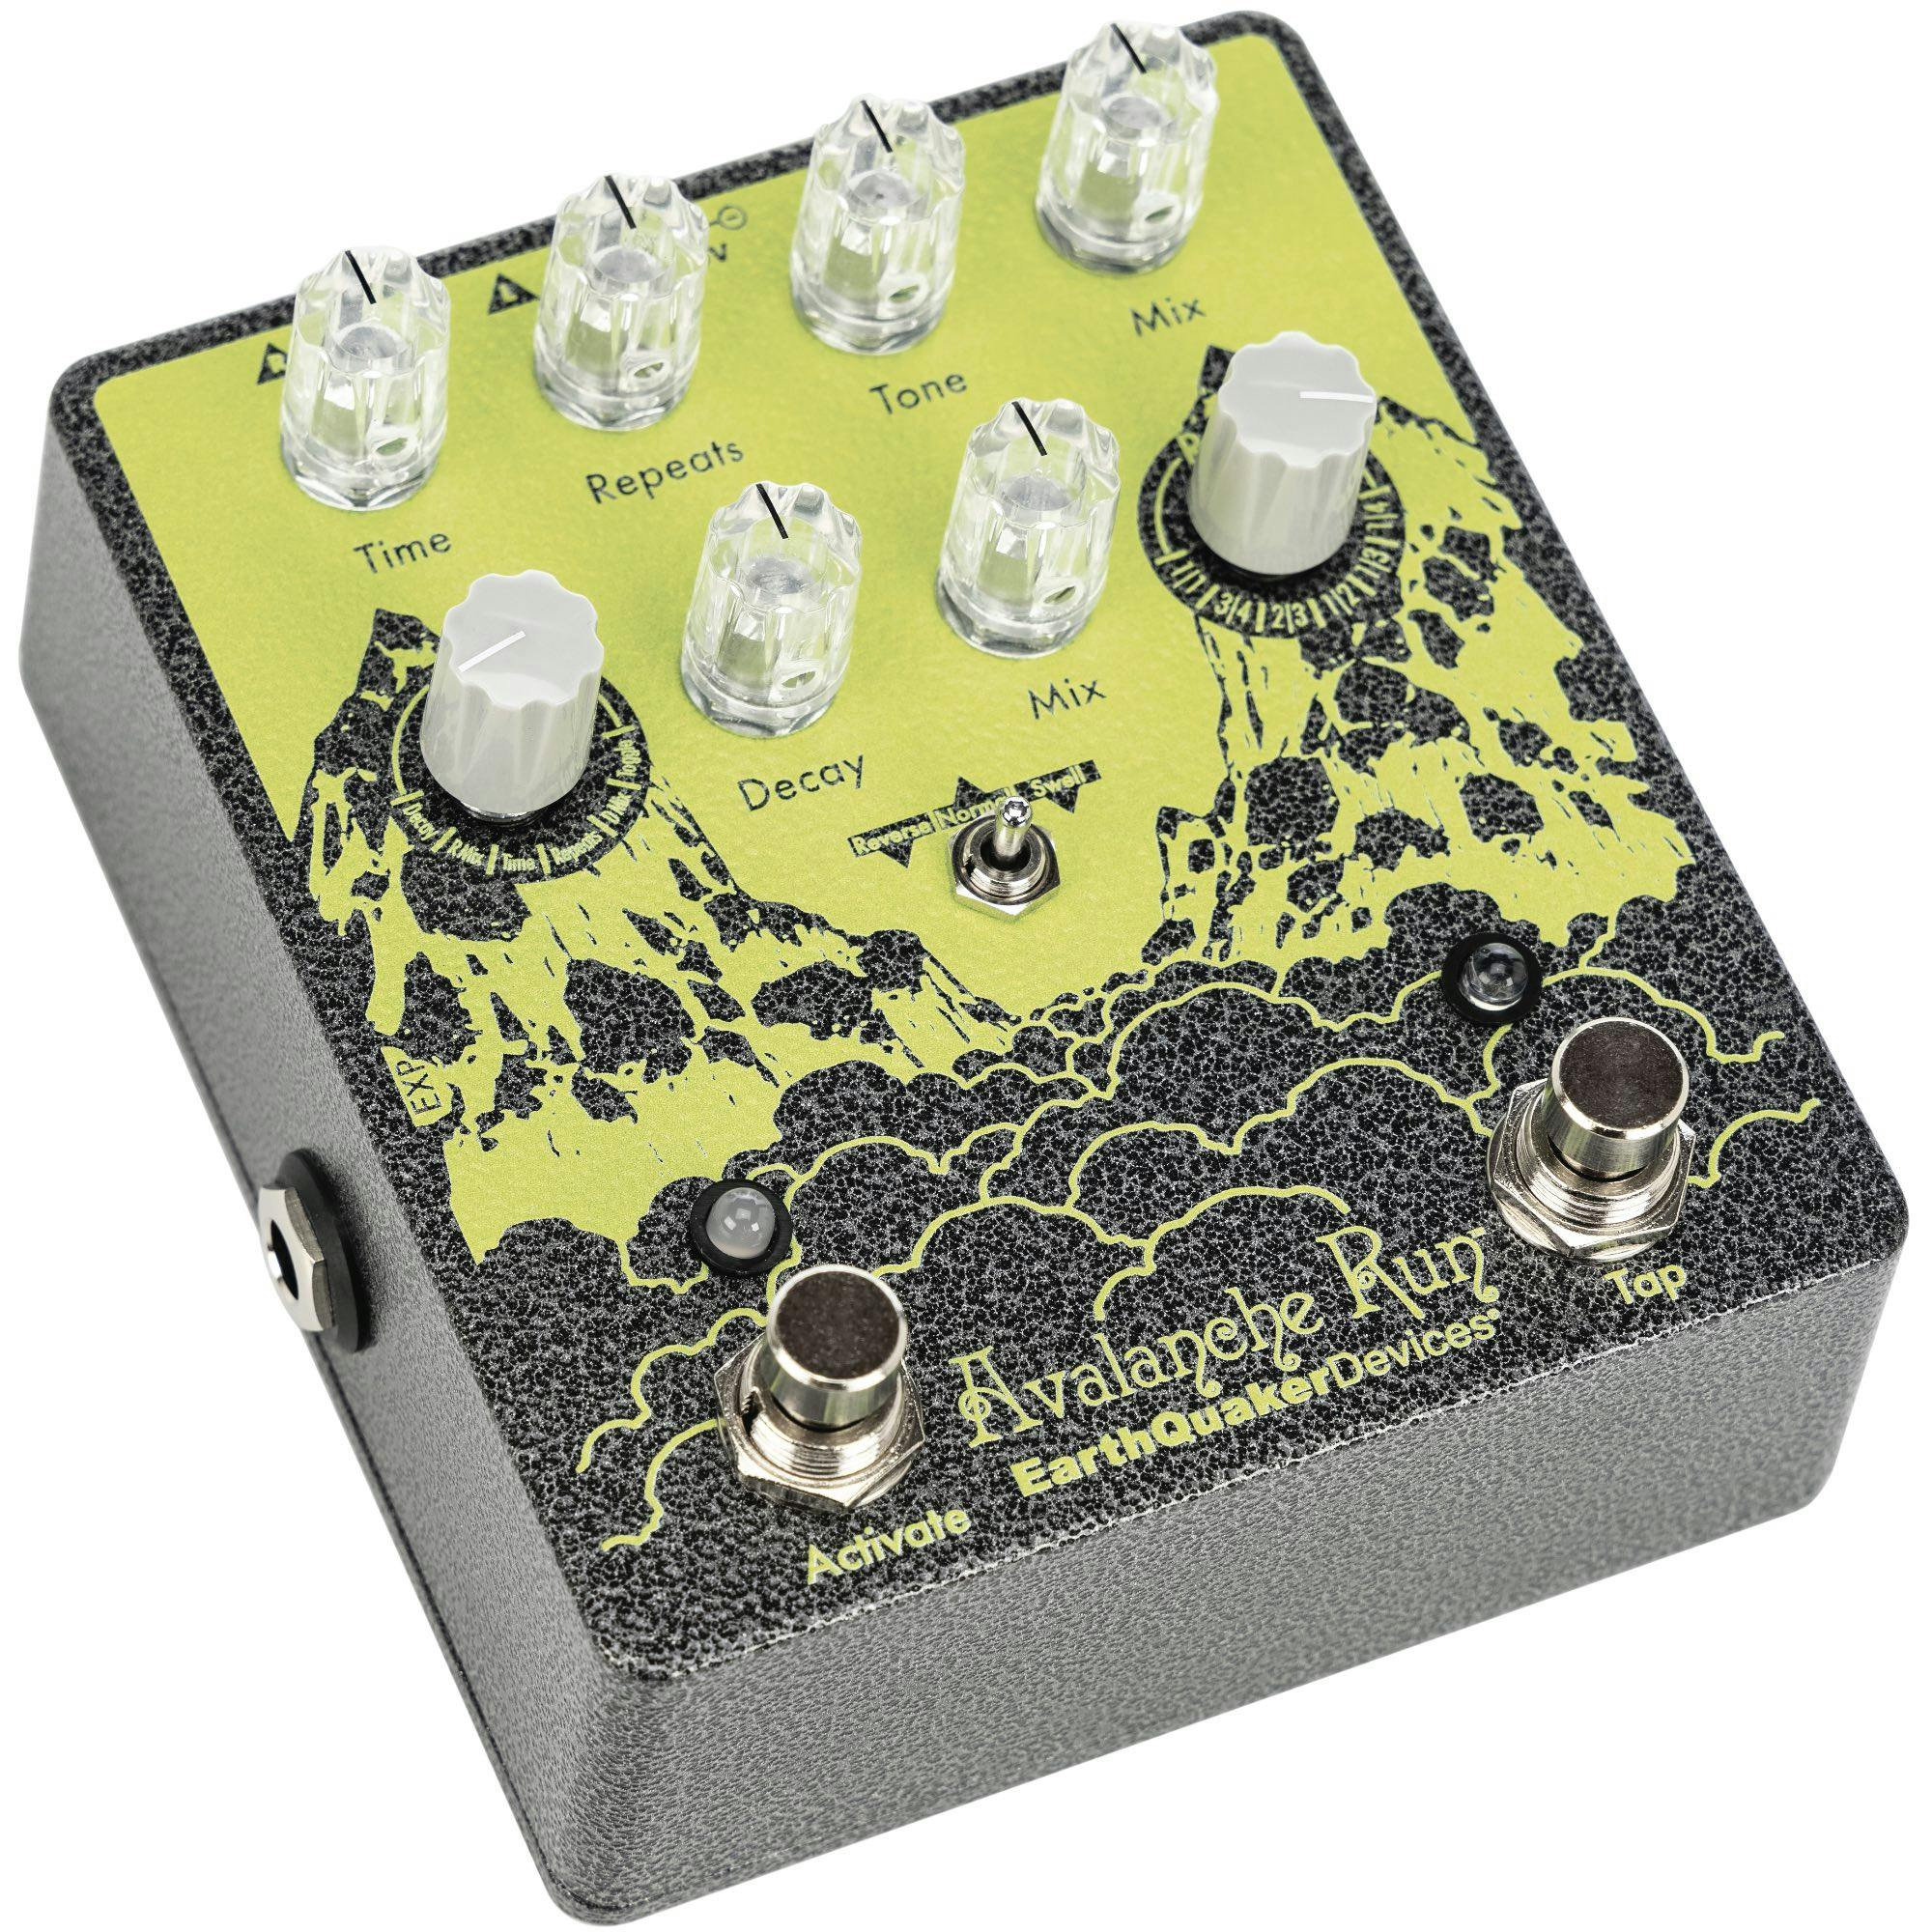 EarthQuaker Devices Avalanche Run V2 Stereo Reverb & Delay Pedal 